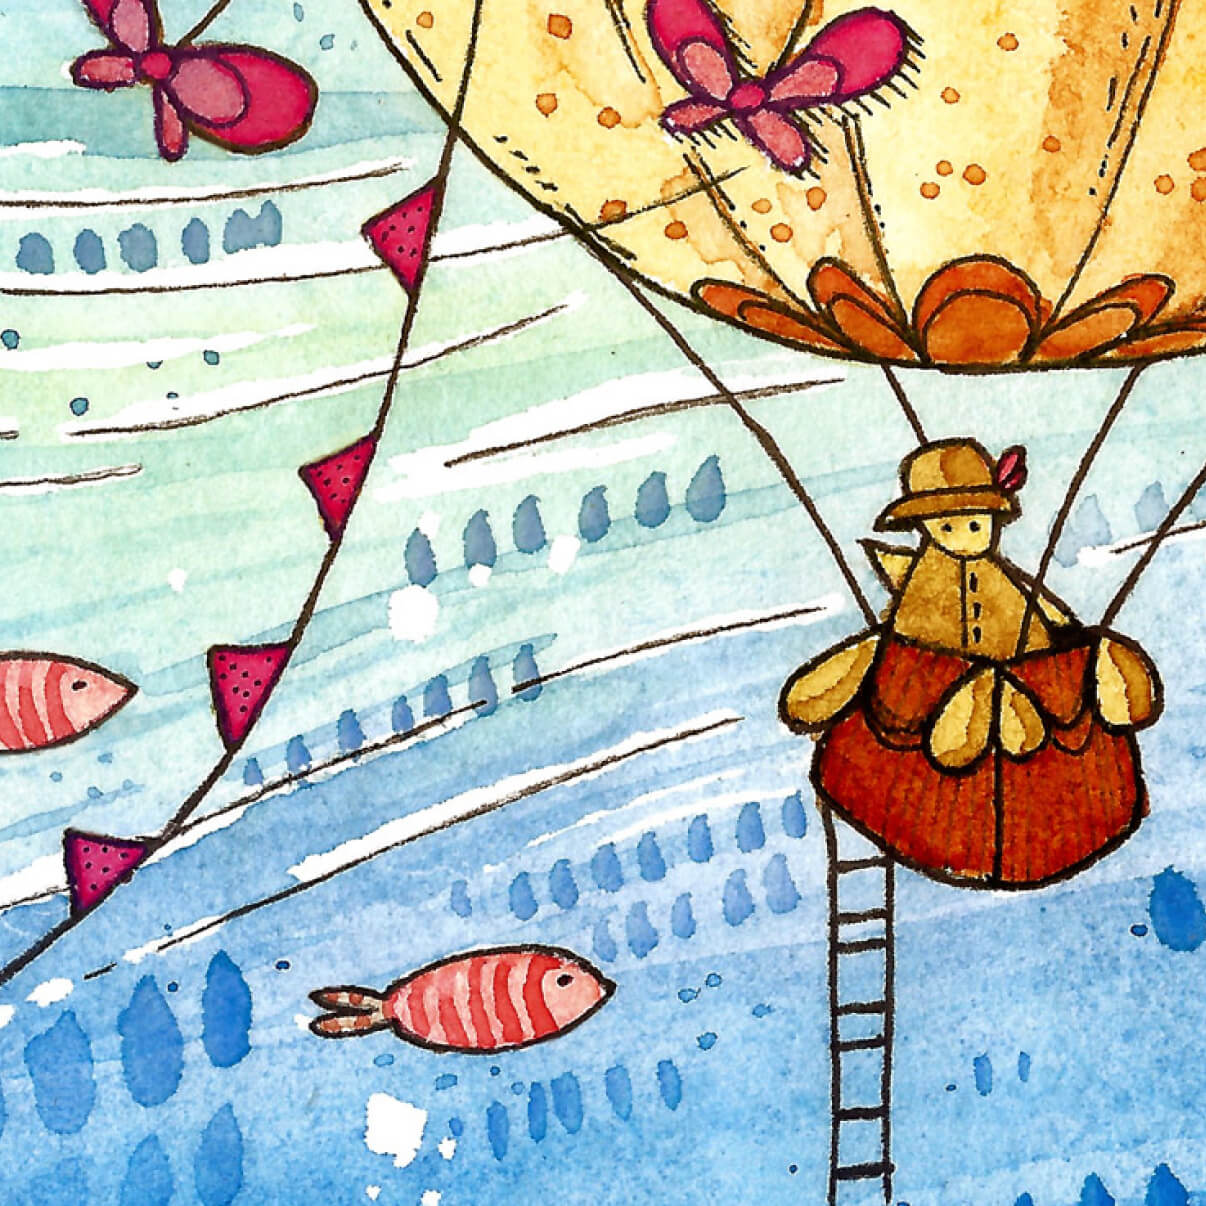 A detail of the design with the hot air balloon